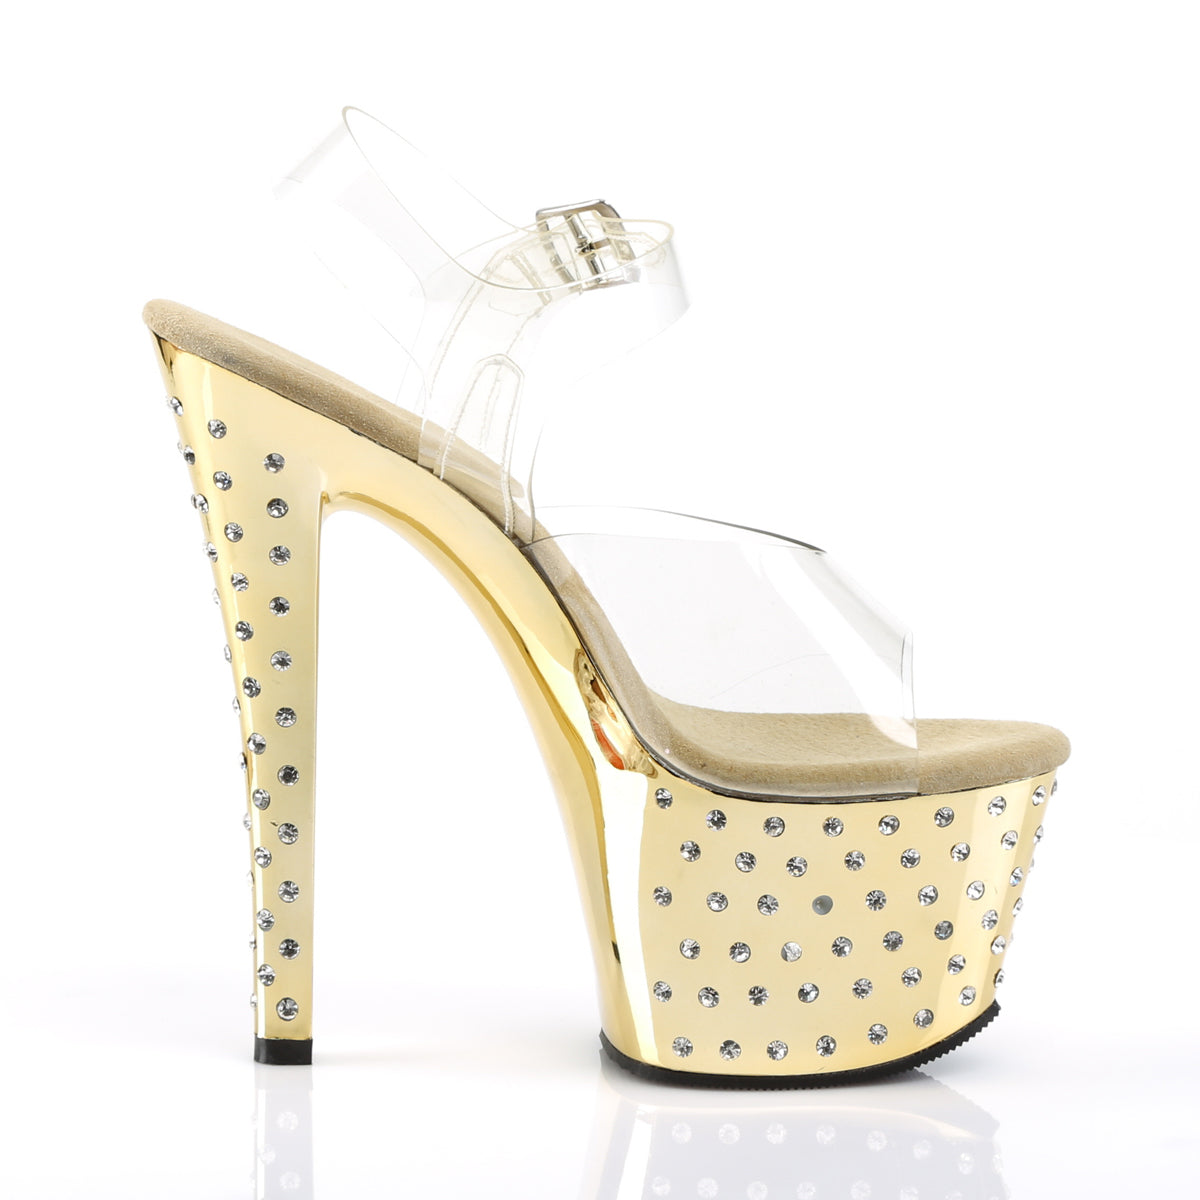 STARDUST-708 7" Clear and Gold Chrome Pole Dancer Platforms-Pleaser- Sexy Shoes Fetish Heels